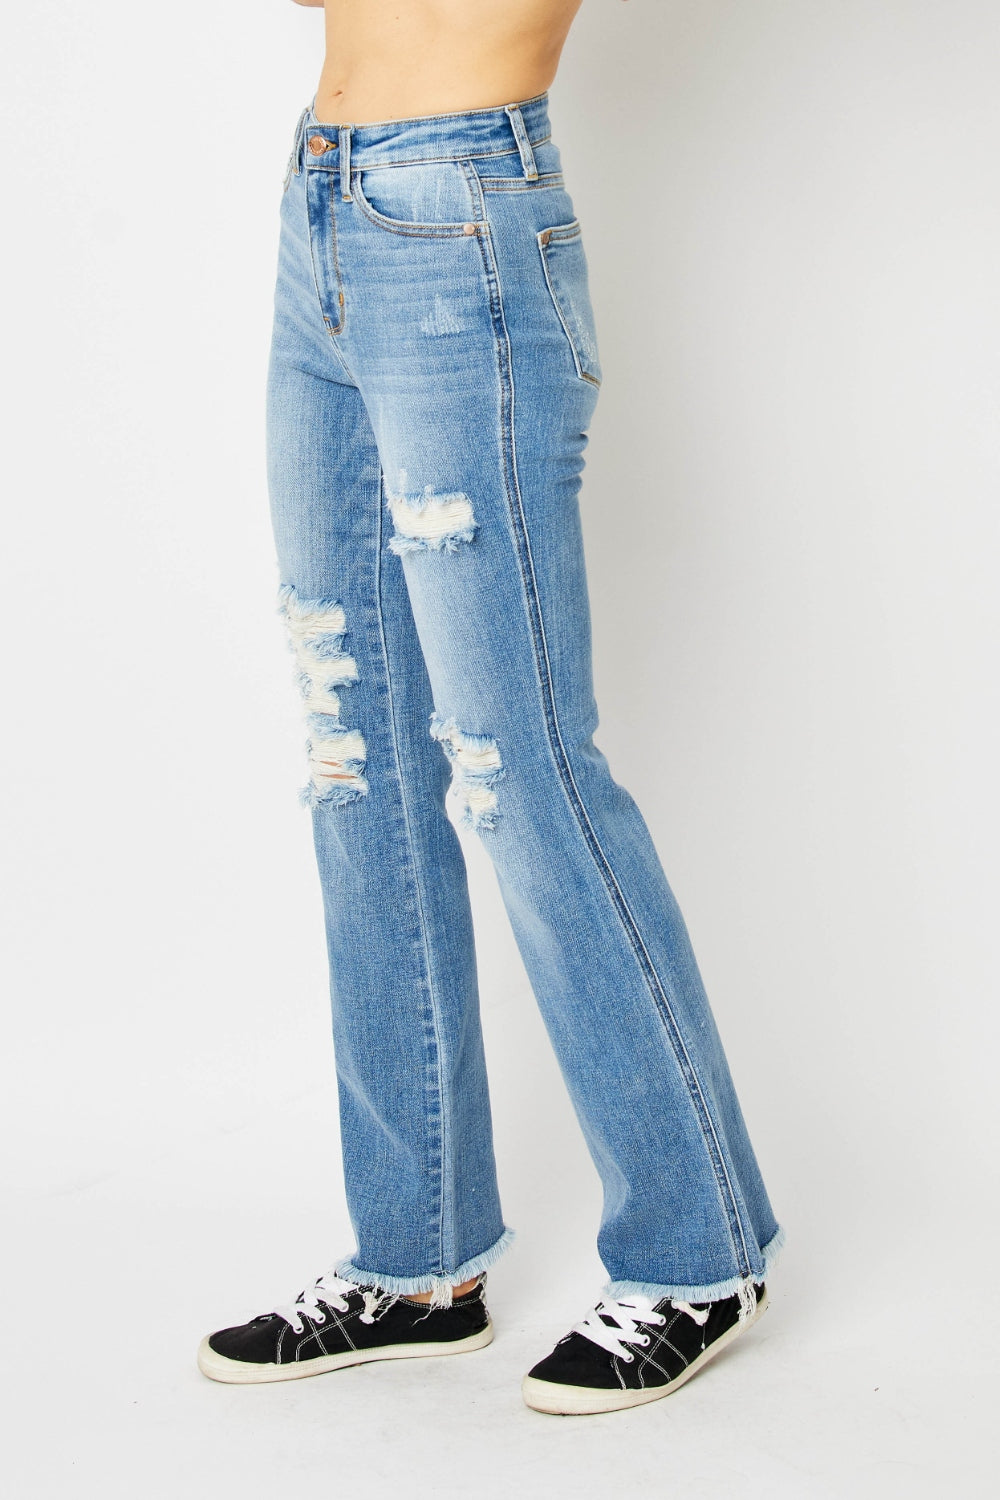 Judy Blue Distressed Raw Hem Bootcut Jeans Southern Soul Collectives